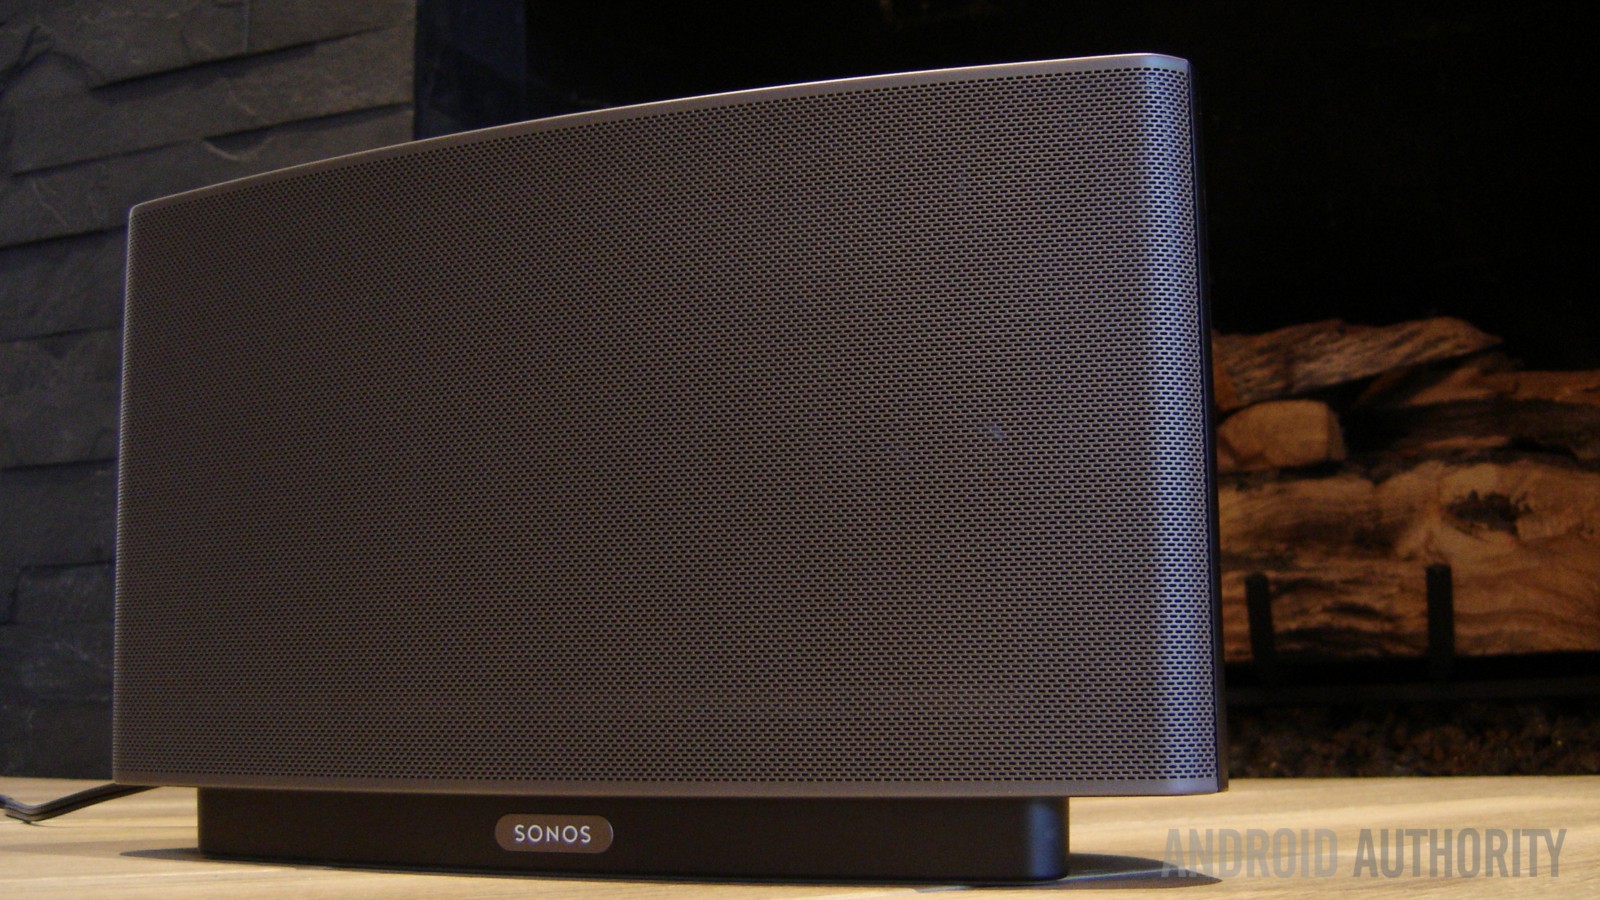 snatch Nu håndflade Sonos PLAY:5 sound system, hands-on and impressions - Android Authority